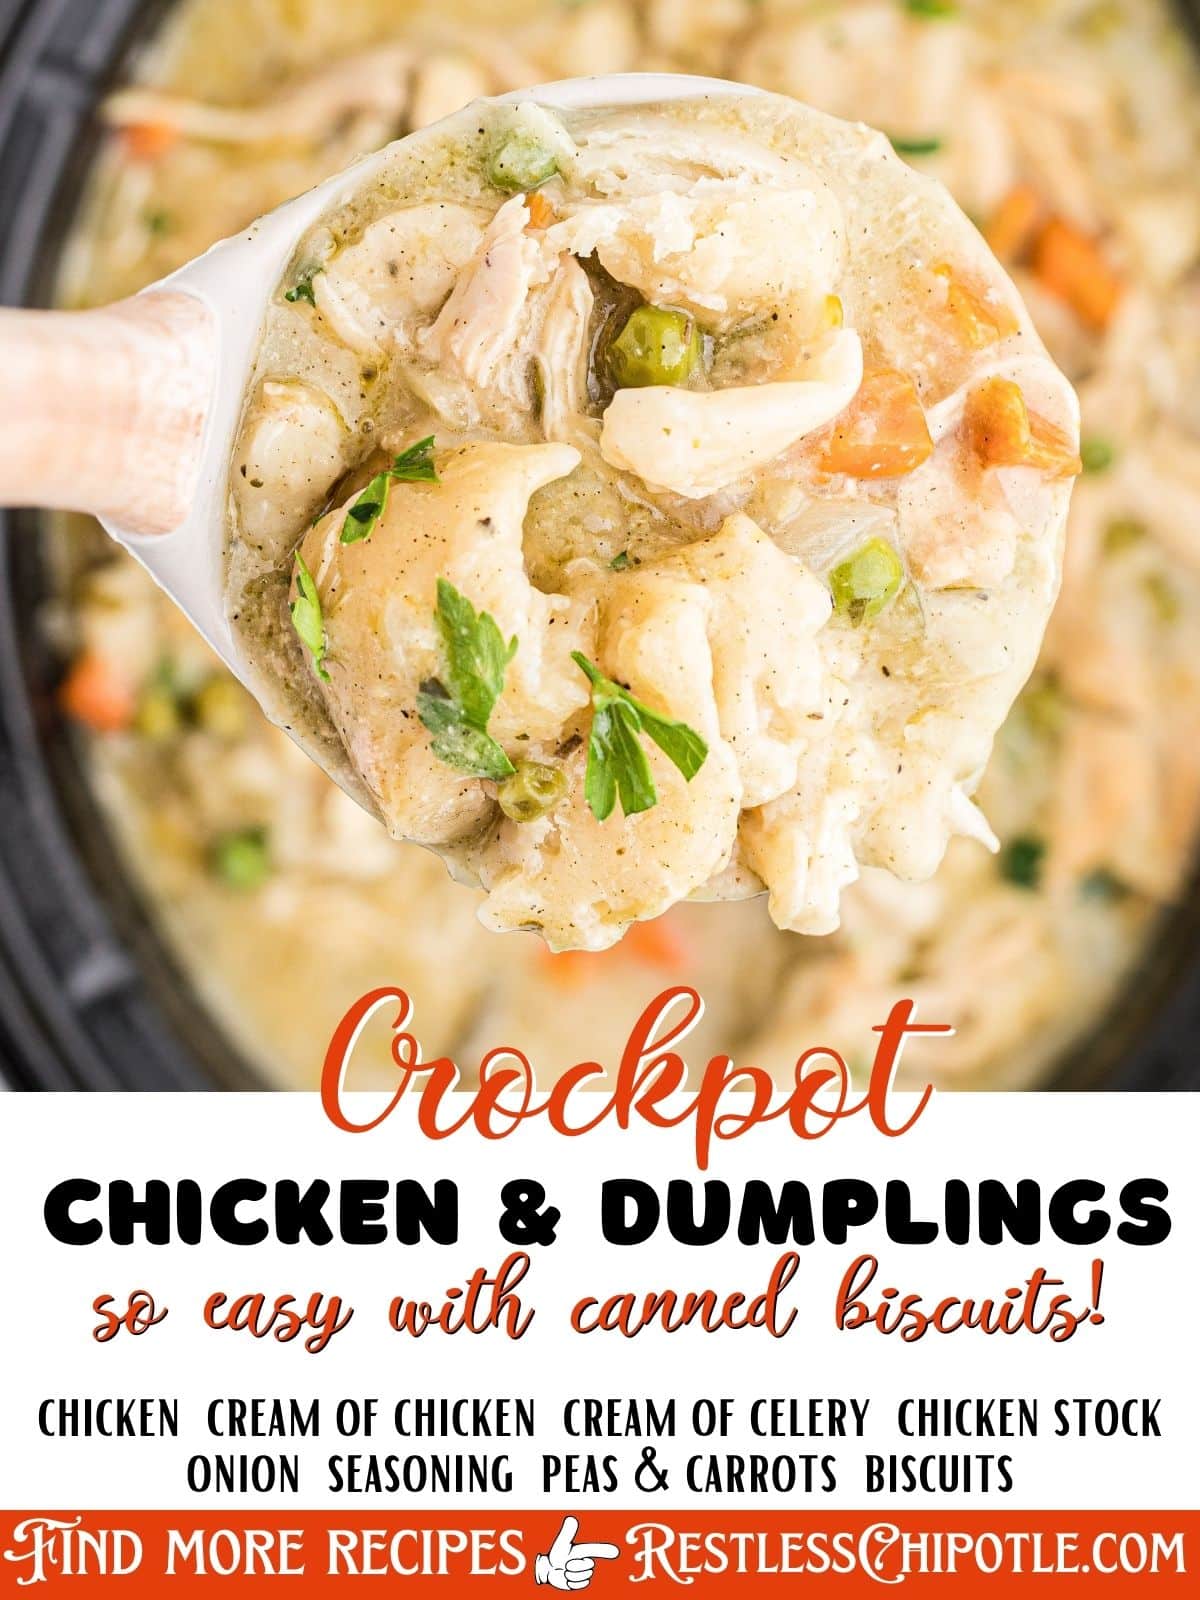 Slow Cooker Chicken & Dumplings with Biscuits - Restless Chipotle